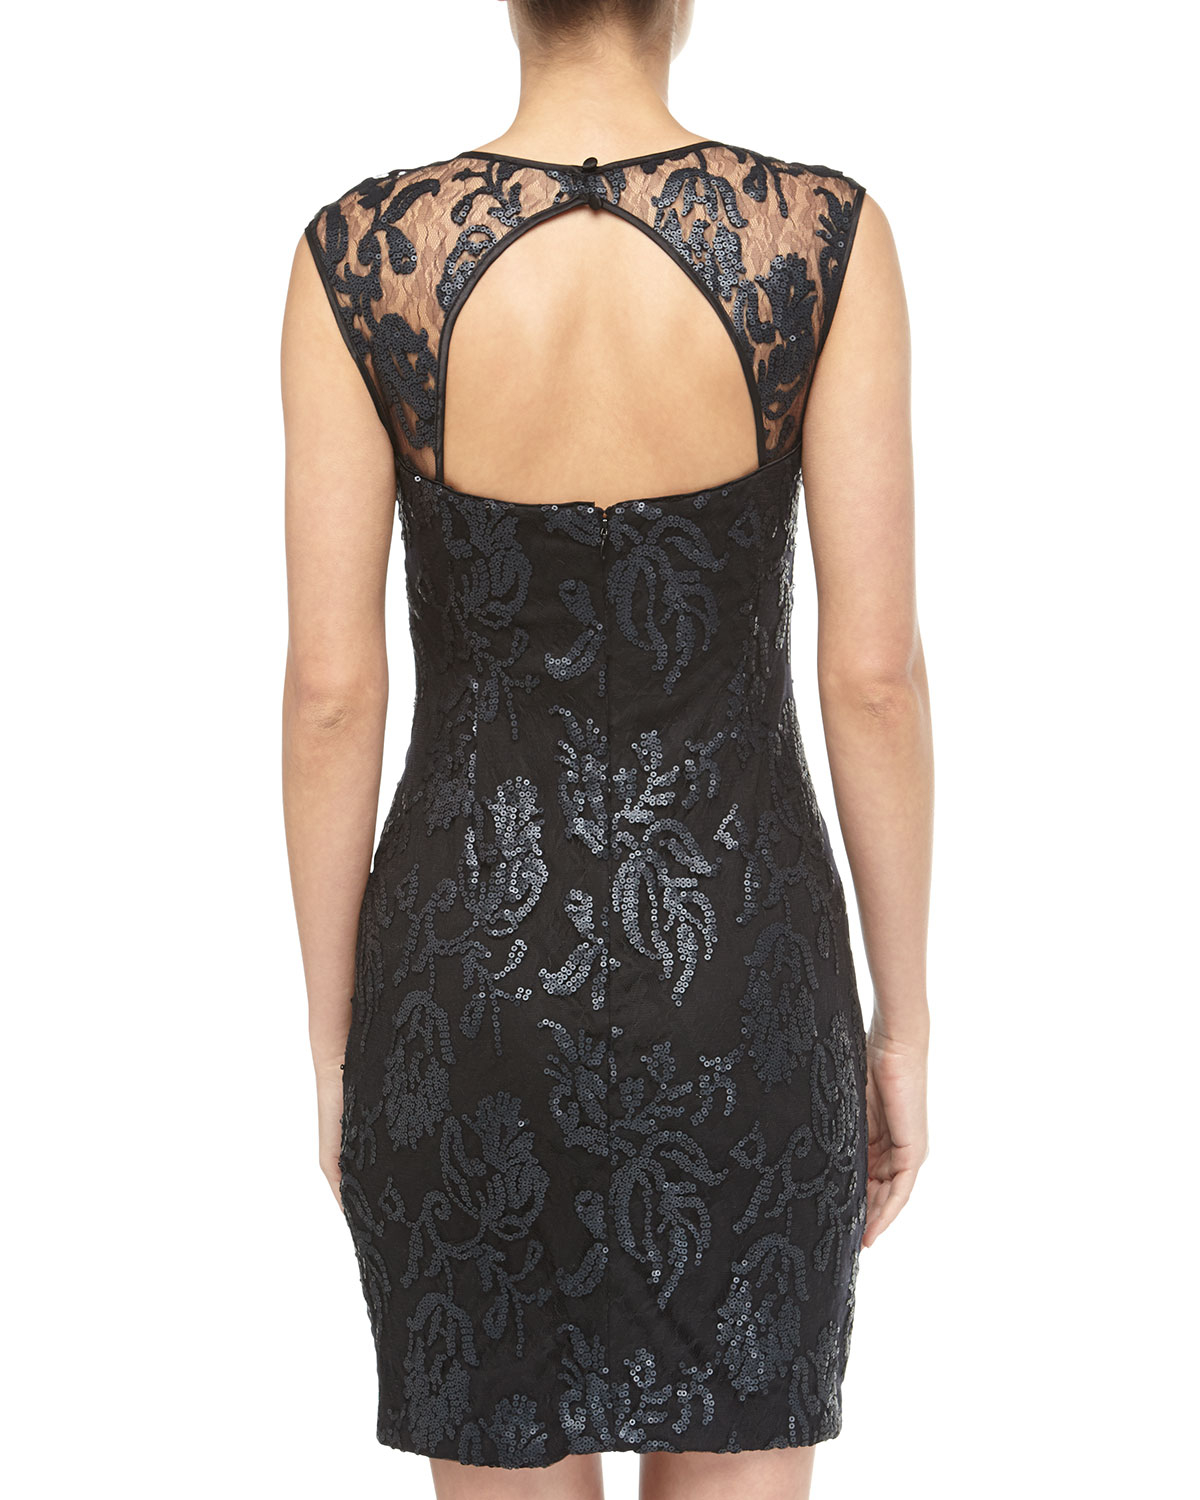 Lyst - Adrianna Papell Sequin Lace Cutoutback Cocktail Dress Black in Black